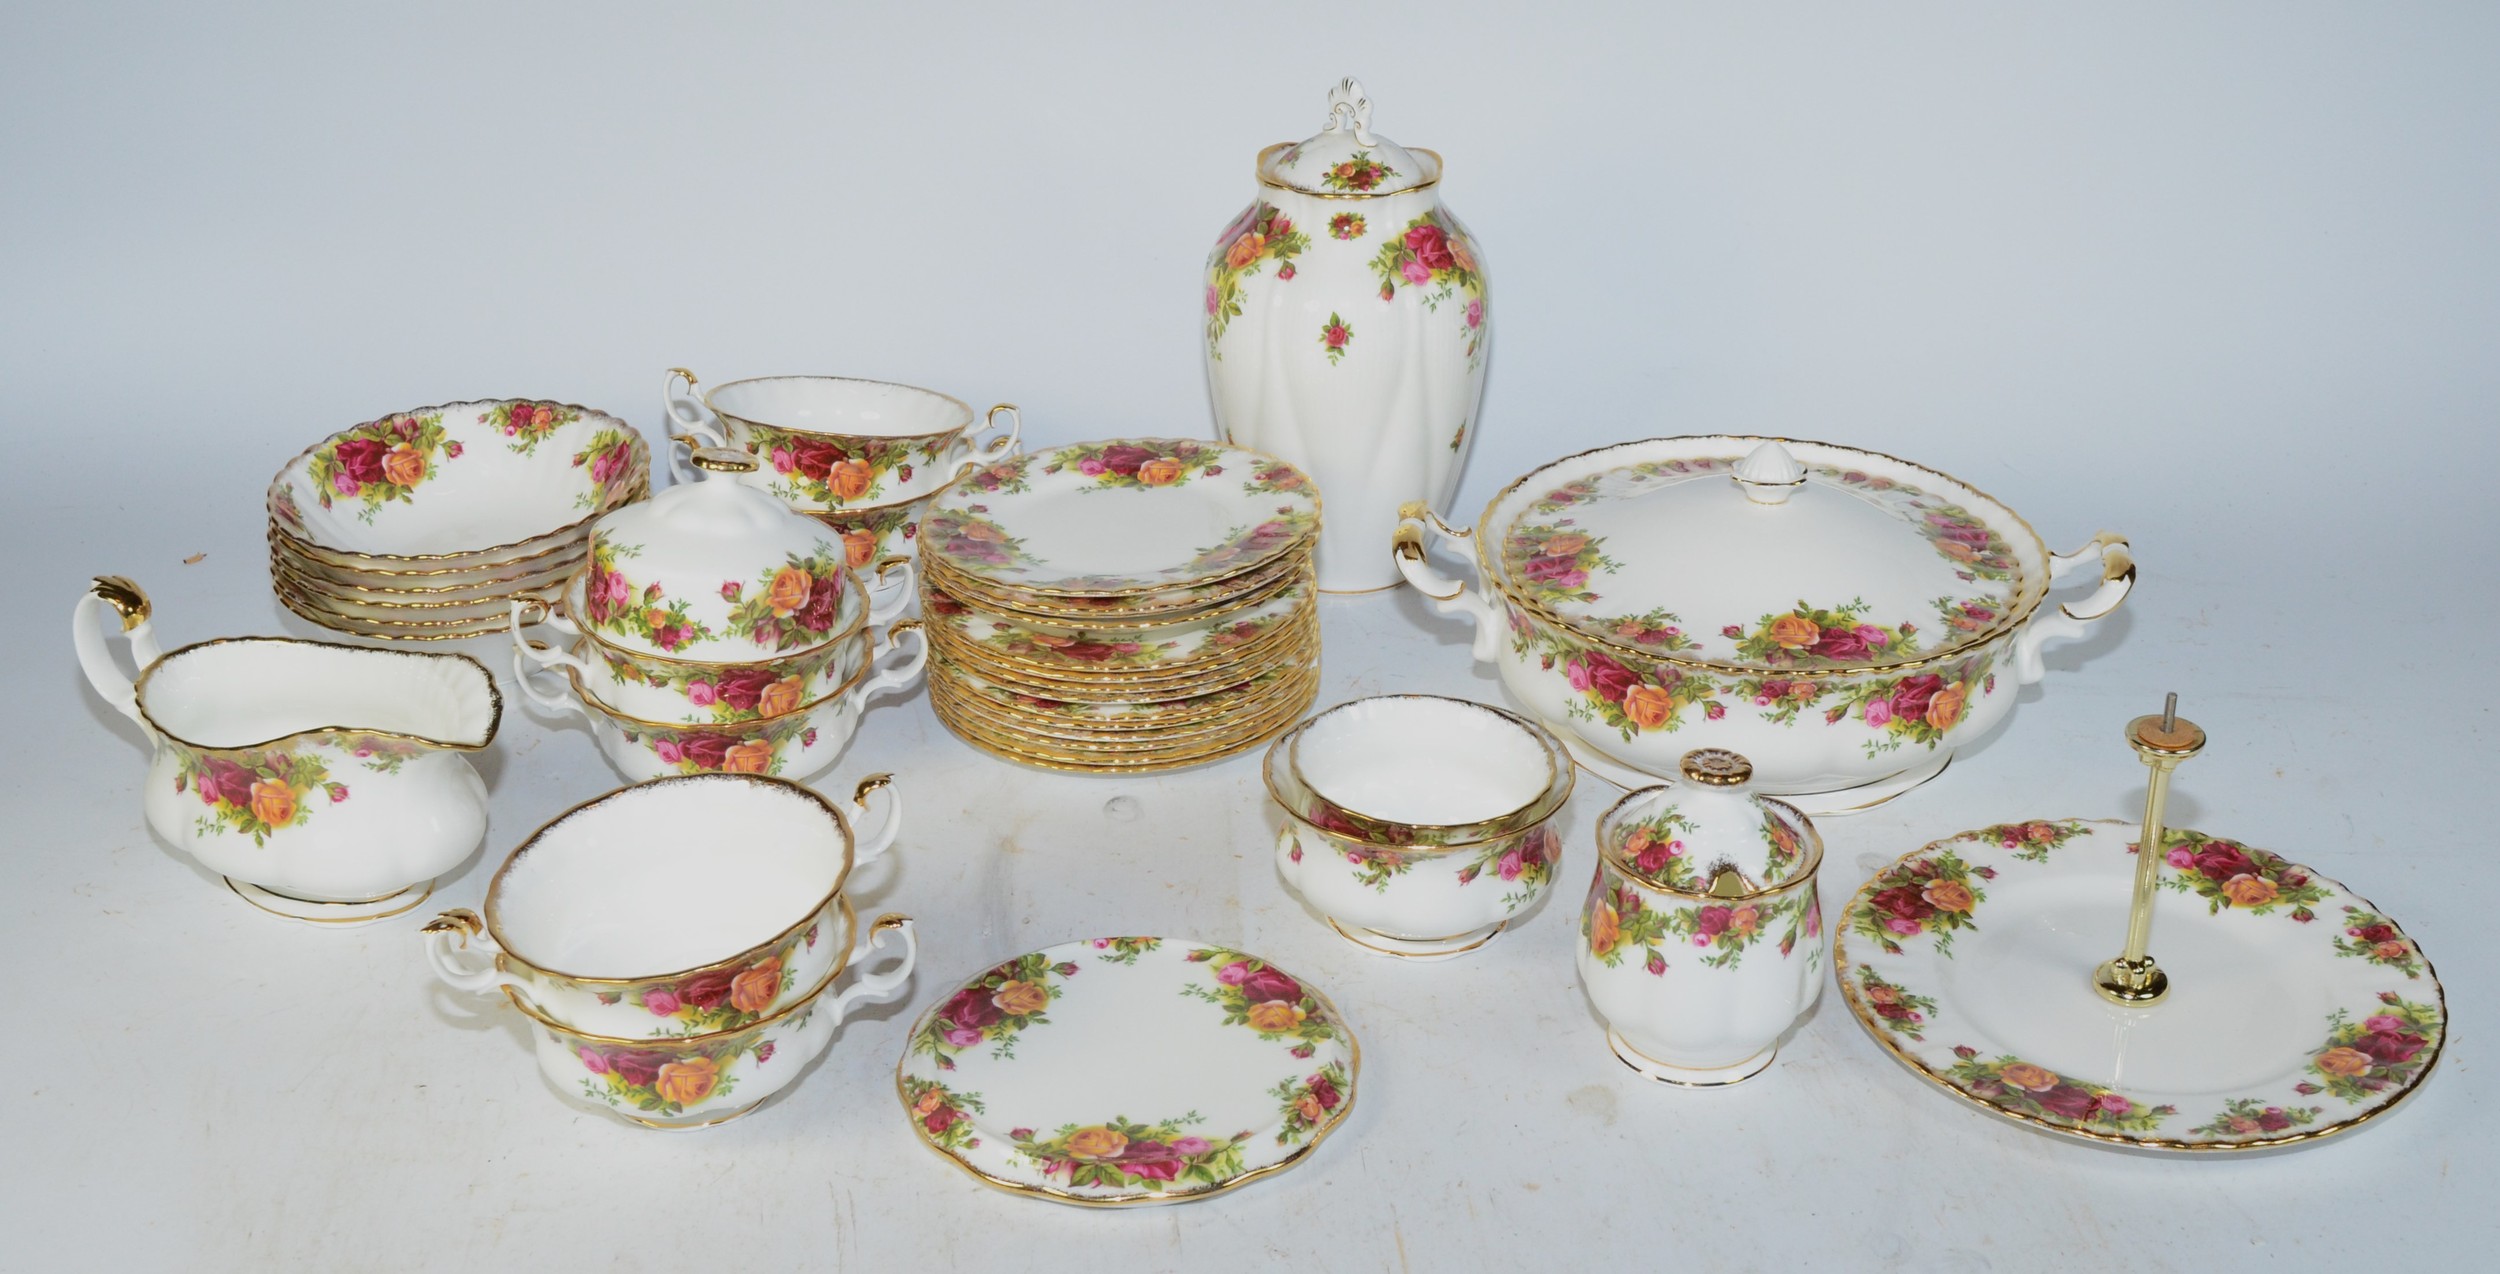 Royal Albert 'Country Roses' Sixty four piece dinner/tea service, together with associated - Image 3 of 5